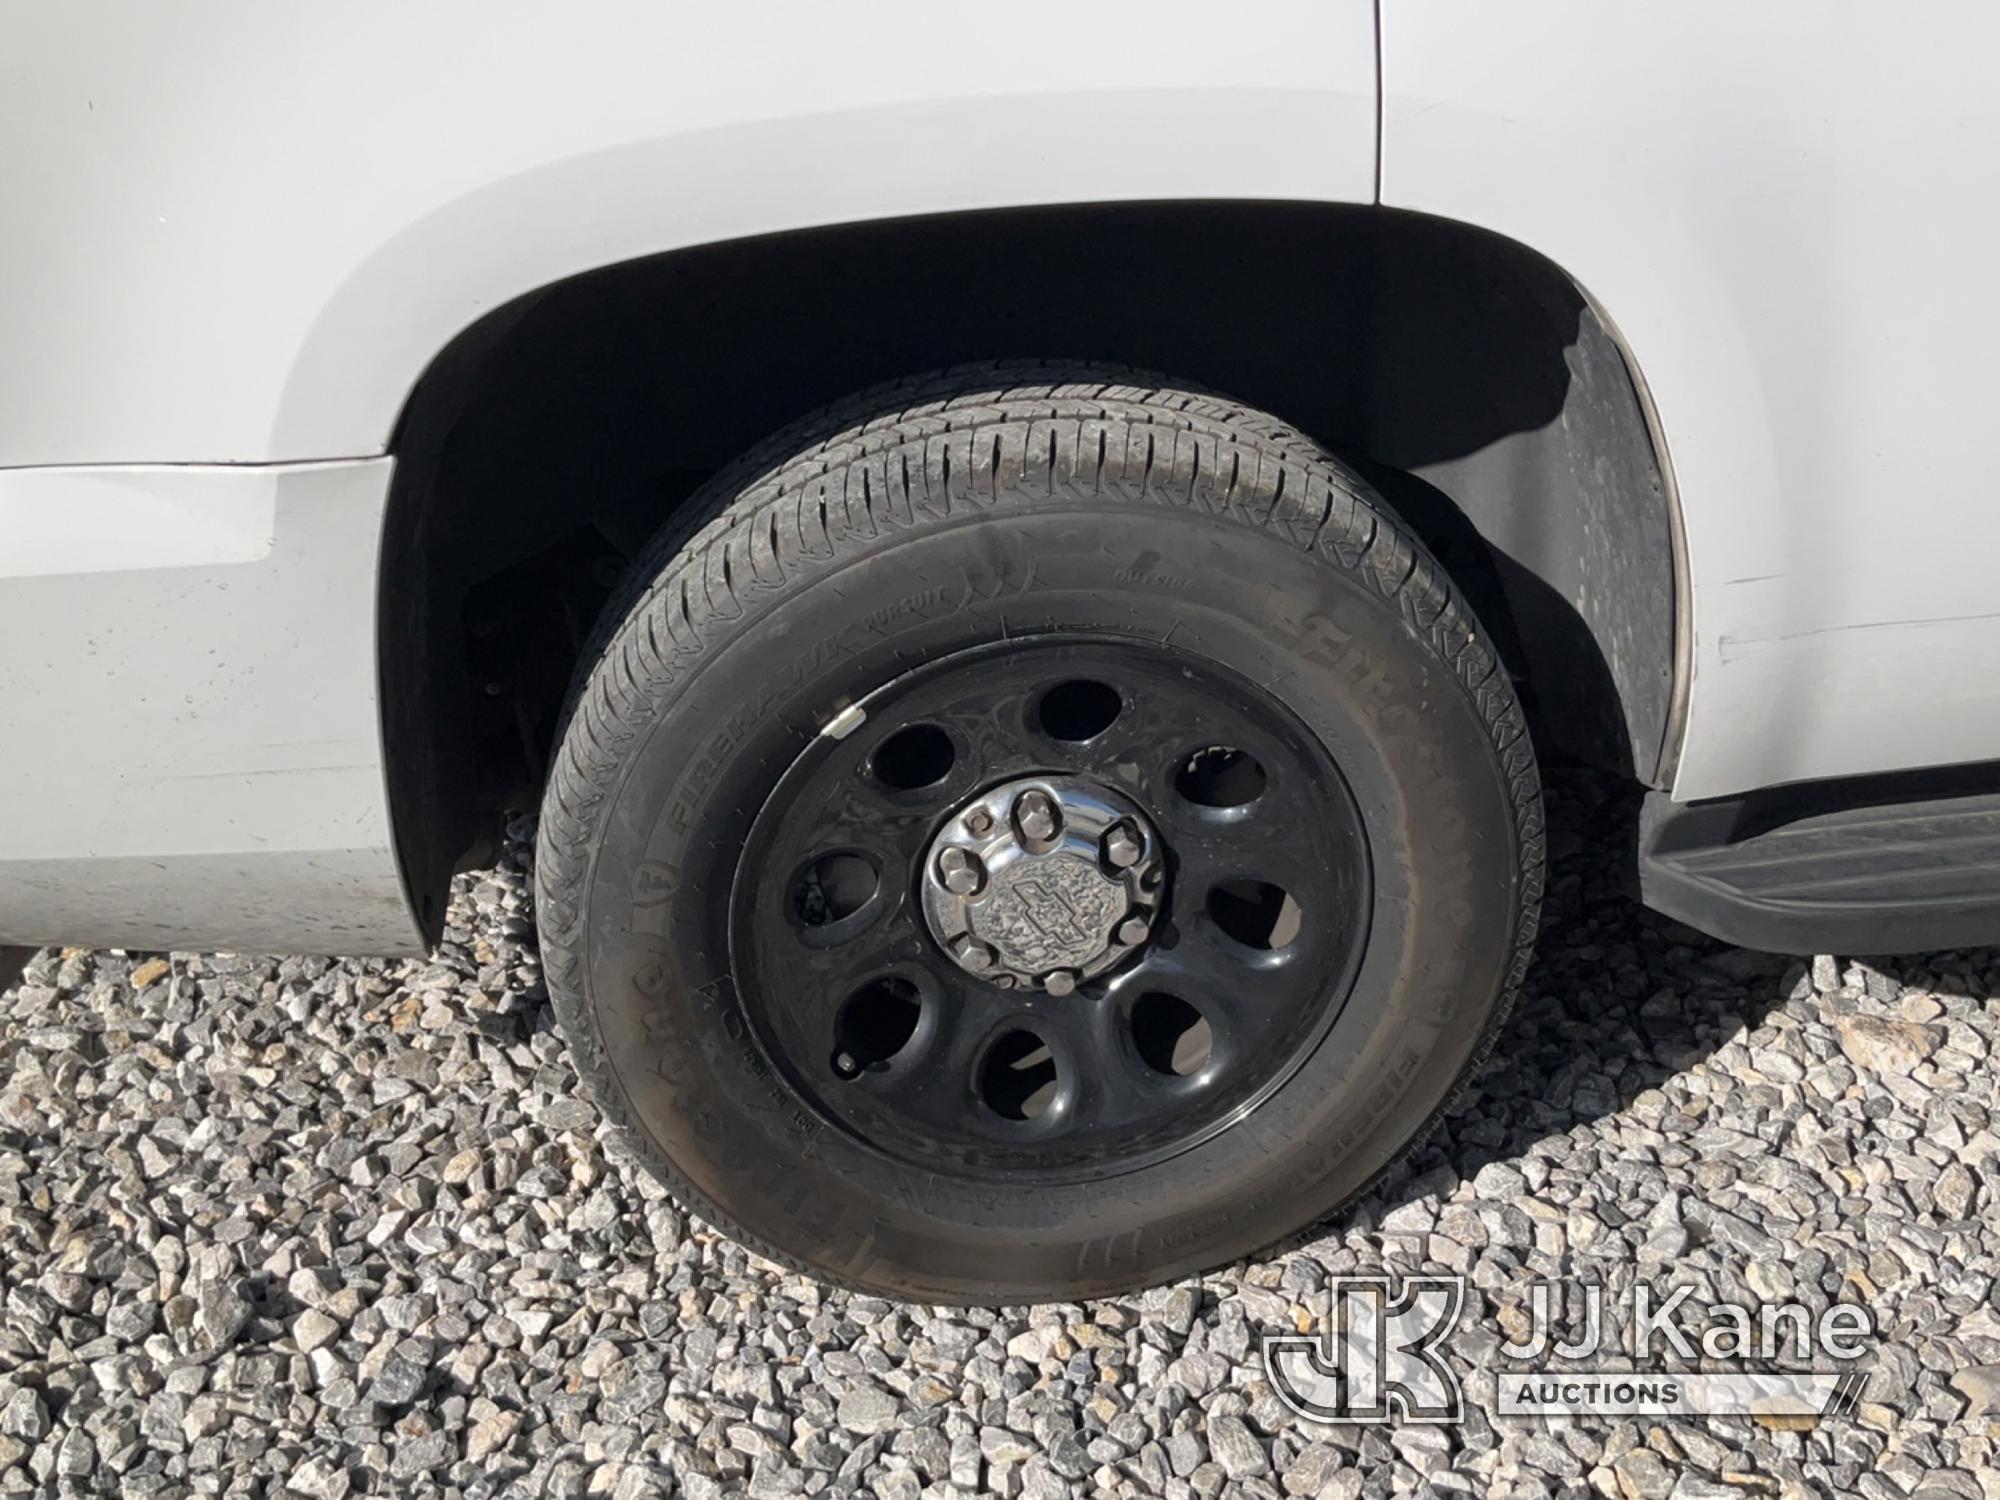 (Las Vegas, NV) 2008 Chevrolet Tahoe Police Package Towed In, Rear Seat Unsecured Wrecked, Runs & Mo